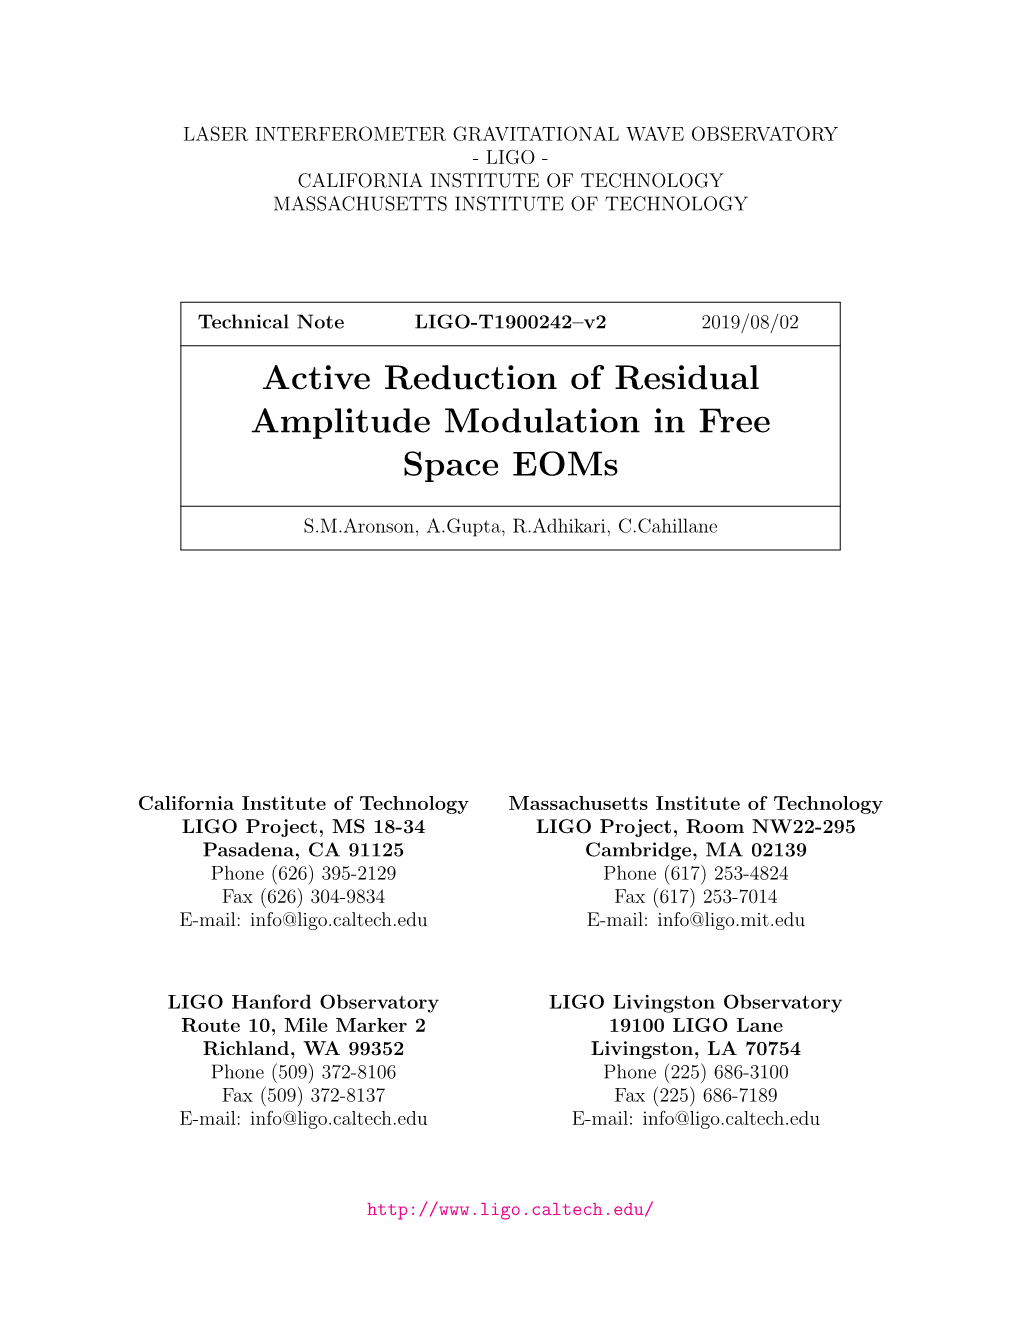 Active Reduction of Residual Amplitude Modulation in Free Space Eoms